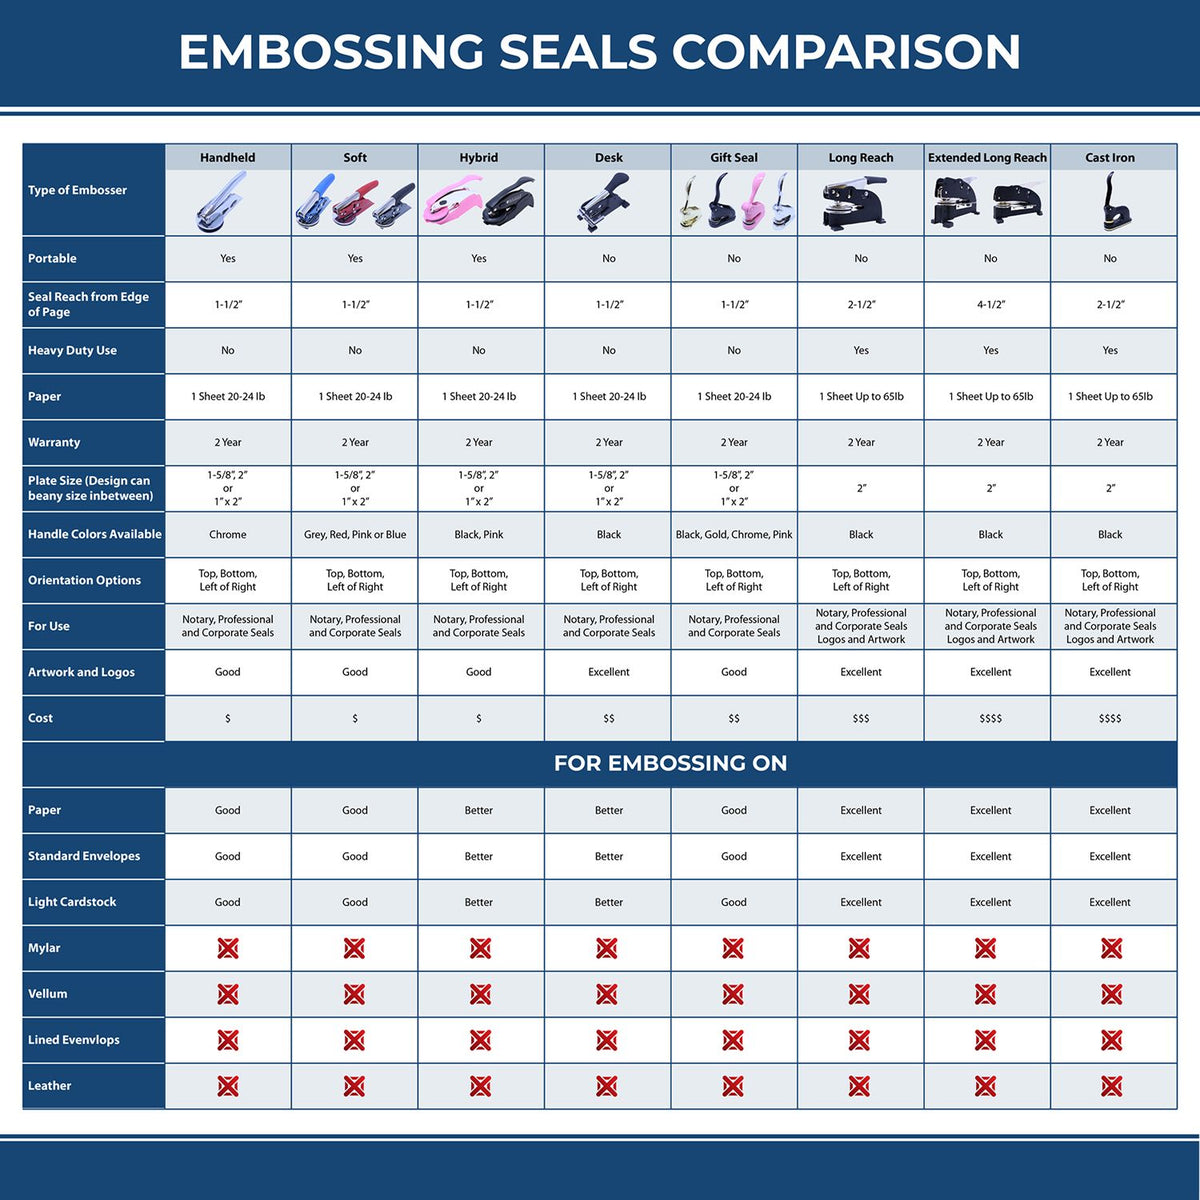 A comparison chart for the different types of mount models available for the Handheld Michigan Architect Seal Embosser.